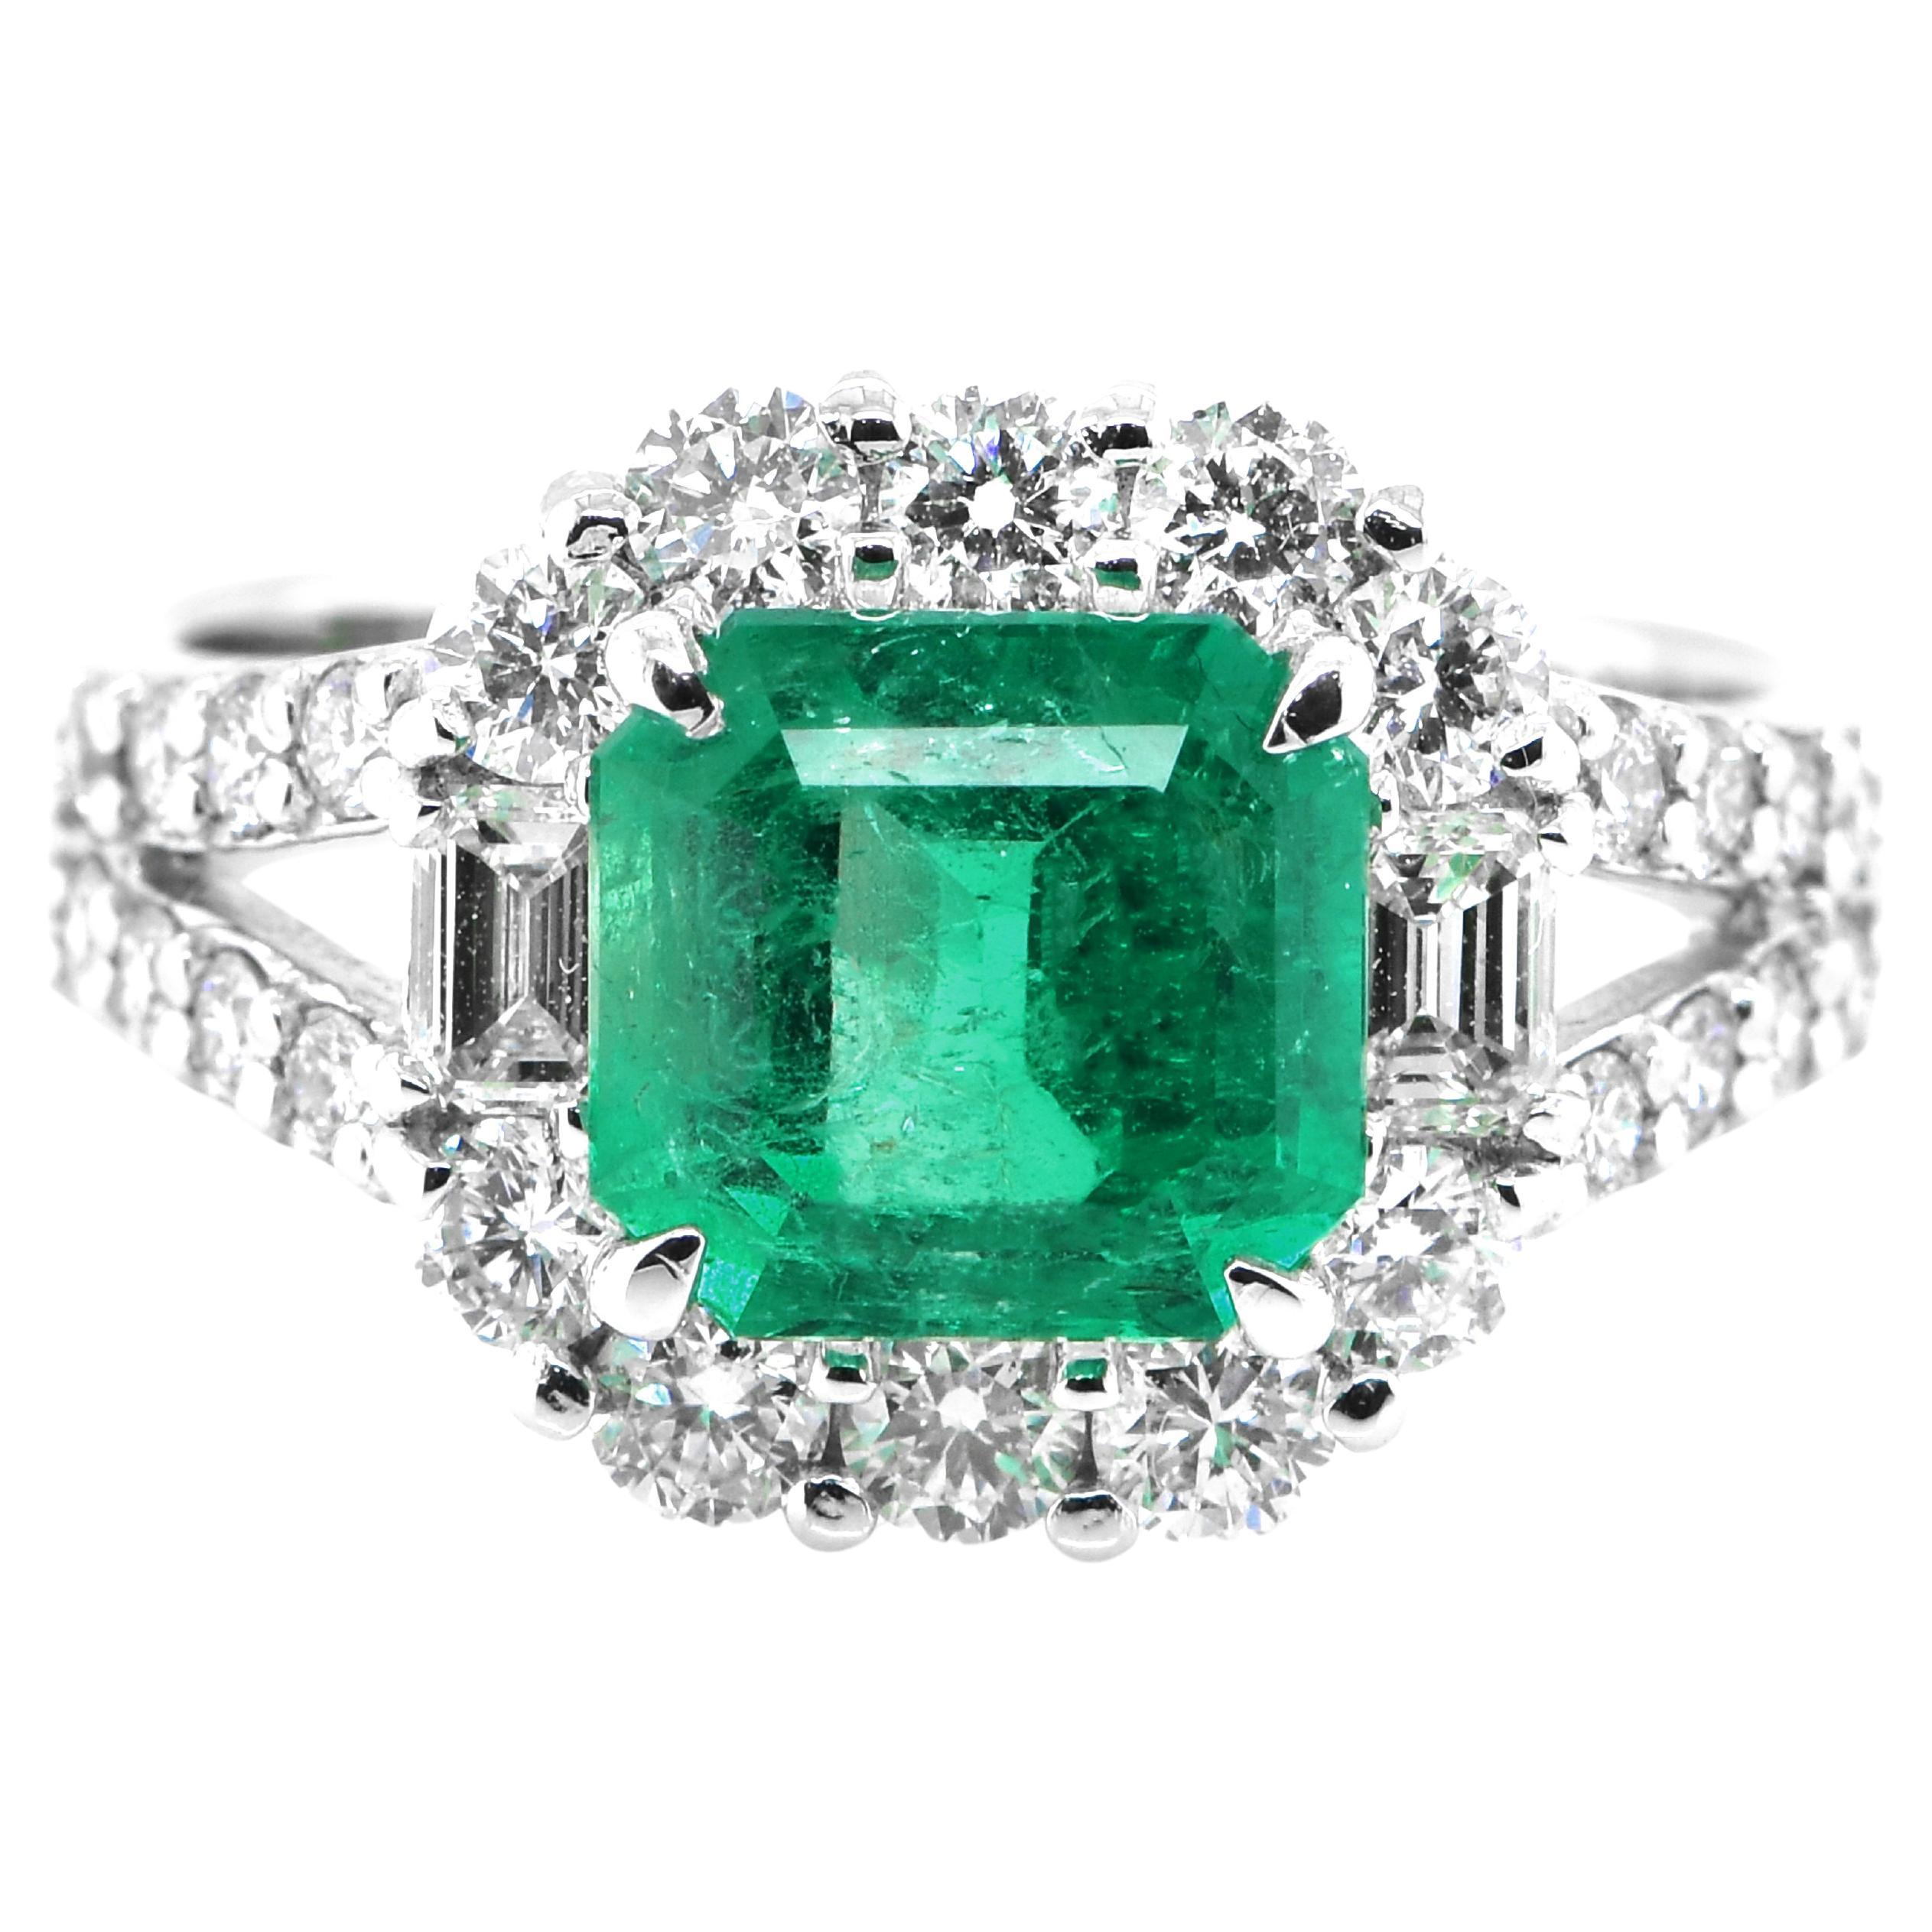 1.97 Carat Natural Colombian Emerald and Diamond Ring Made in Platinum